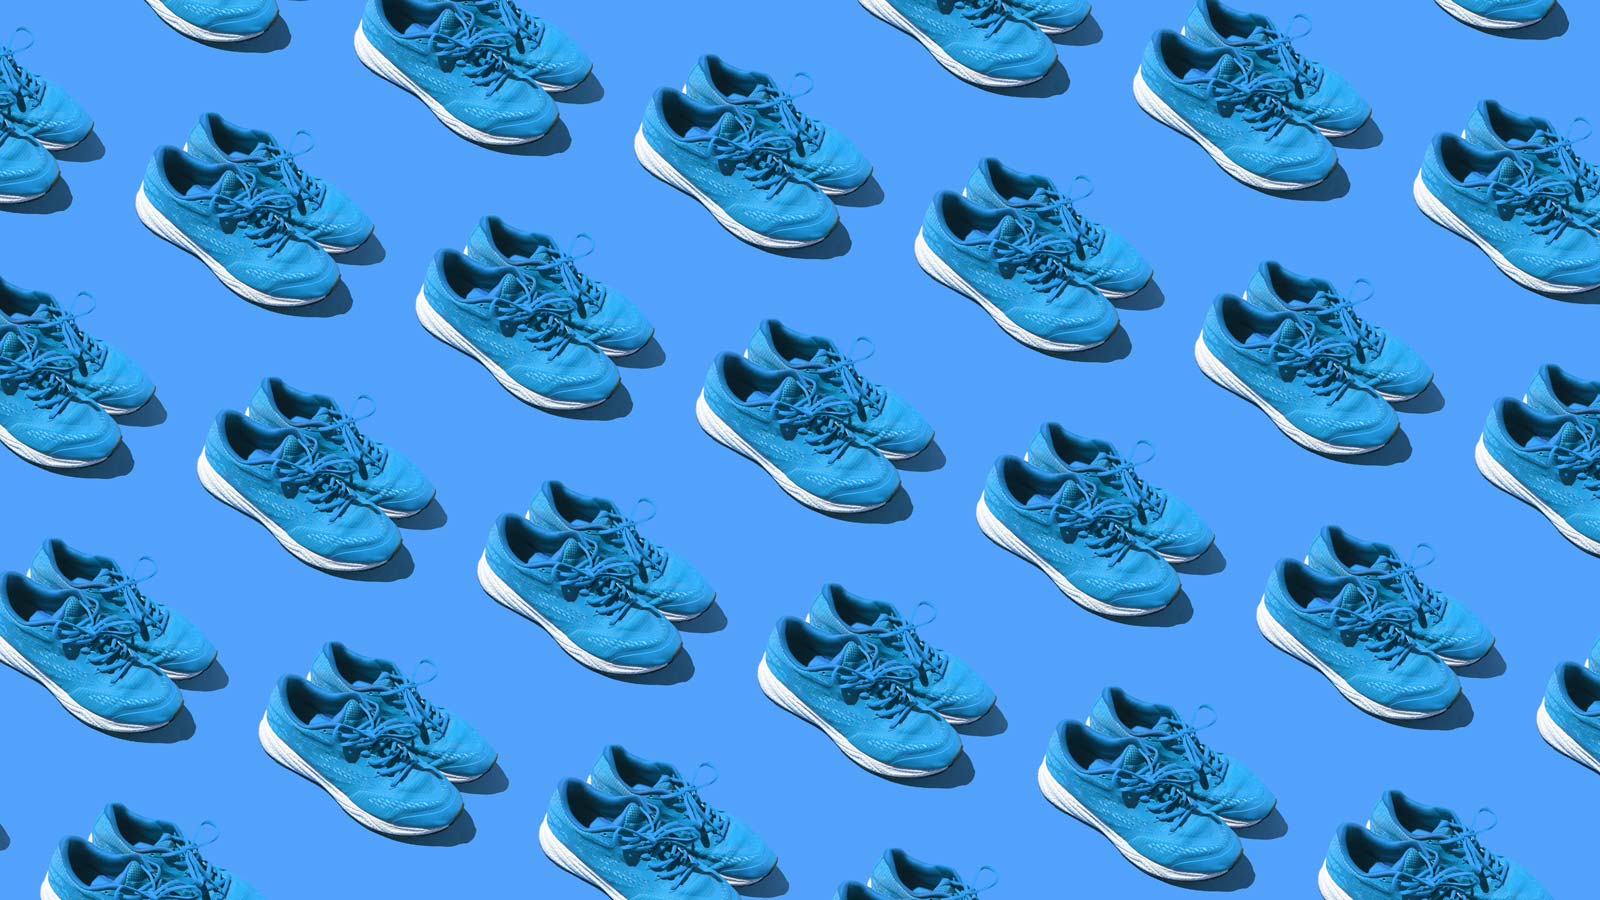 Pattern of used blue sneakers on a blue background. Concept of exercise, marathon, race, healthy life, training and comfort